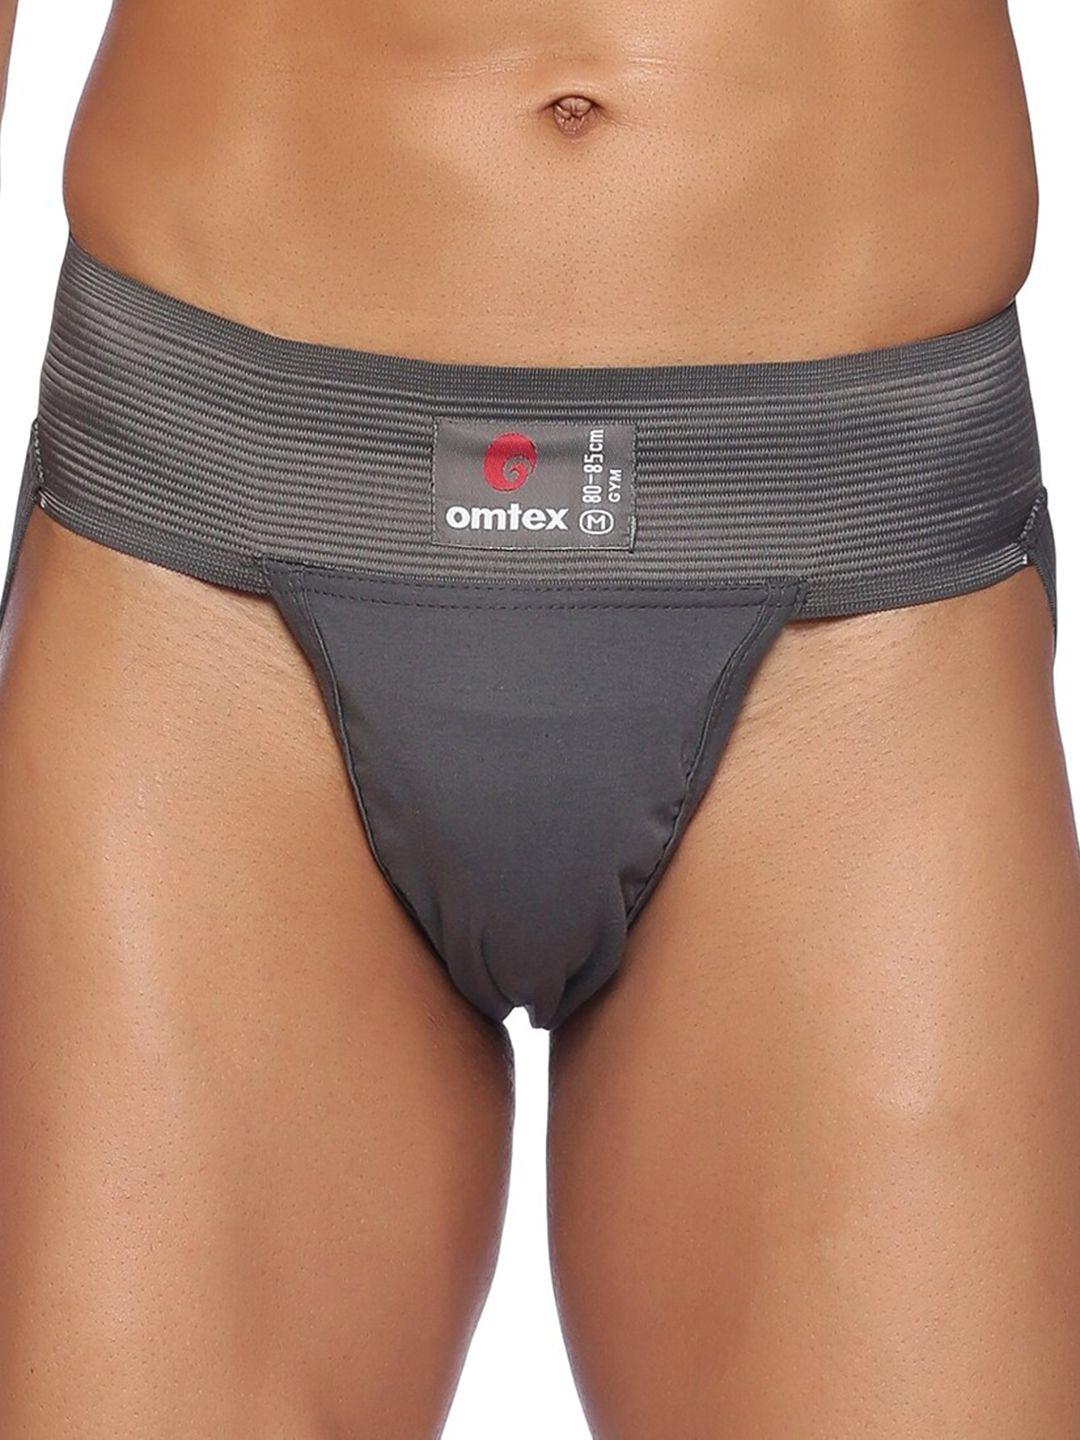 Omtex Logo Printed Stretchable Supporter Jockstraps With Cup Pocket Briefs GymGXS